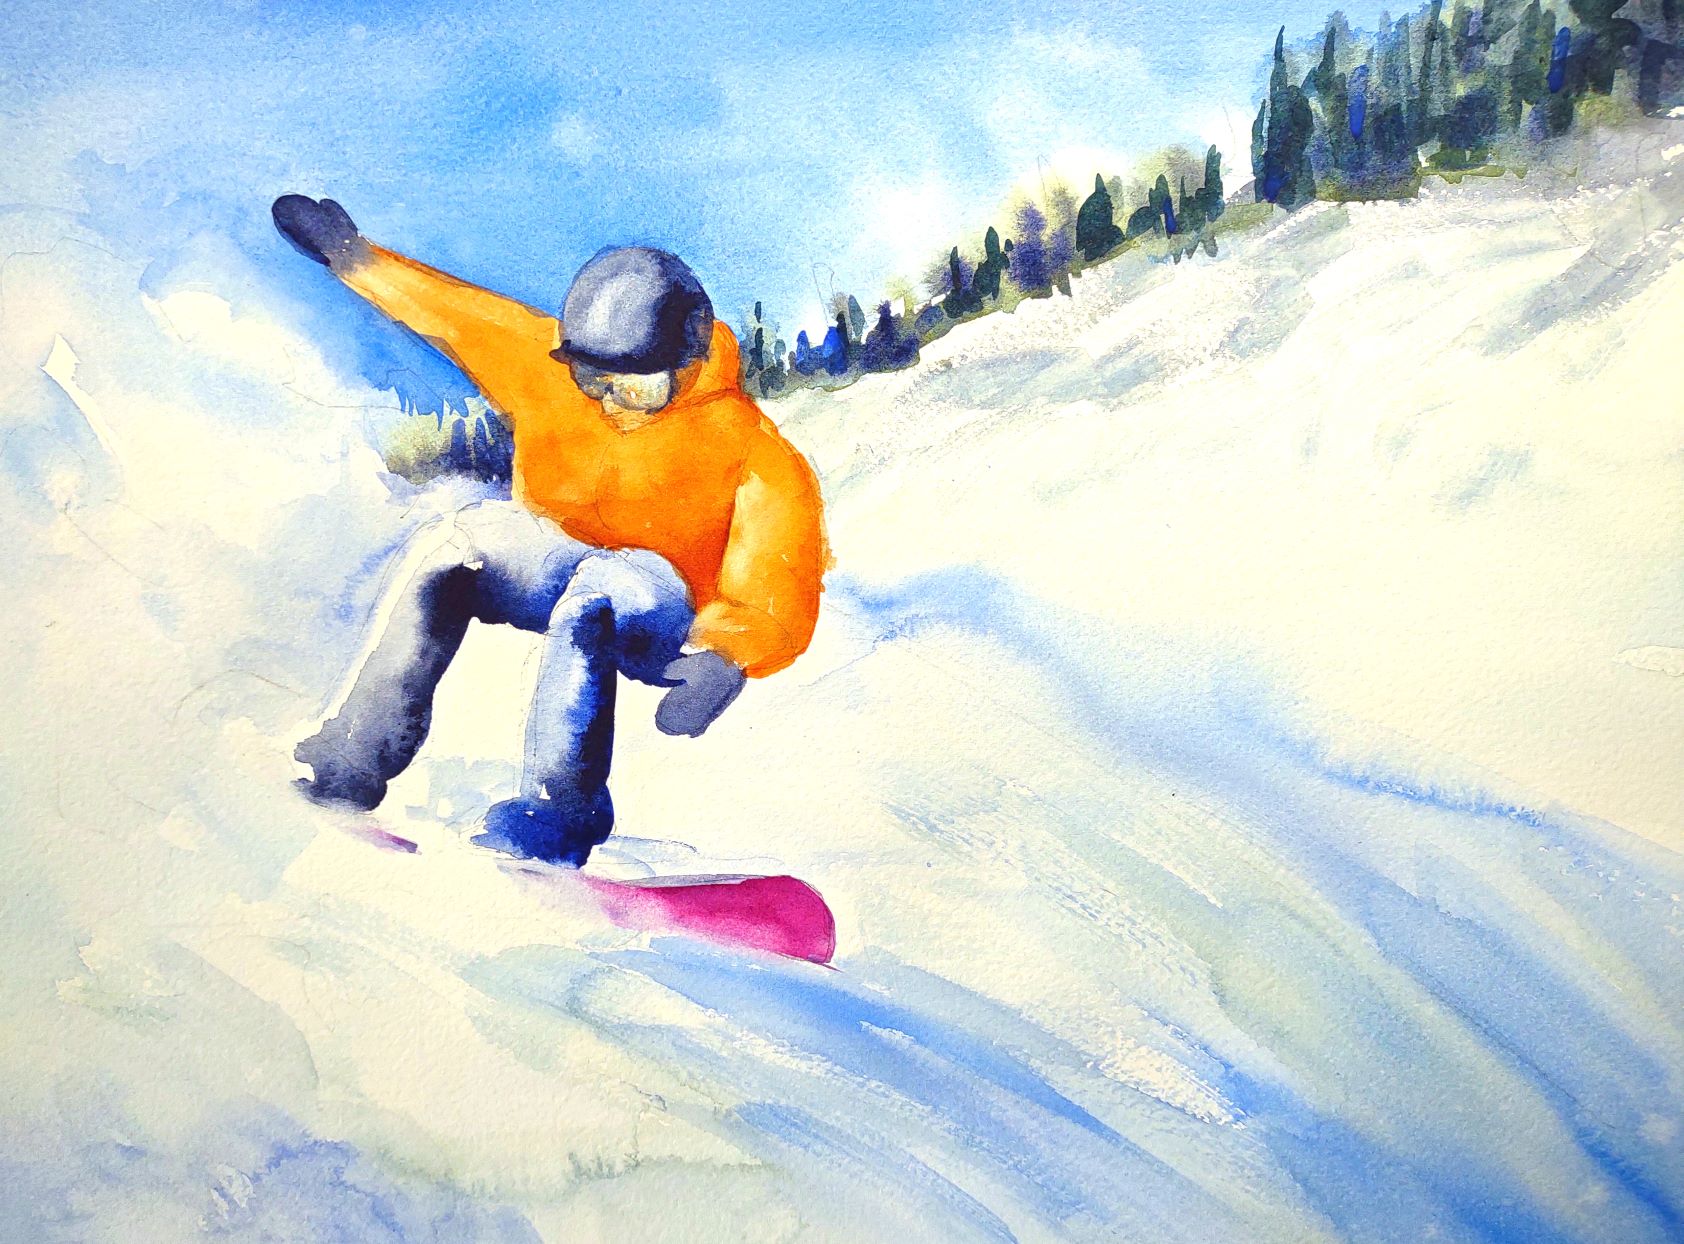 Watercolor painting of a snowboarder in Sally Stormon's art piece "Shreddin'"